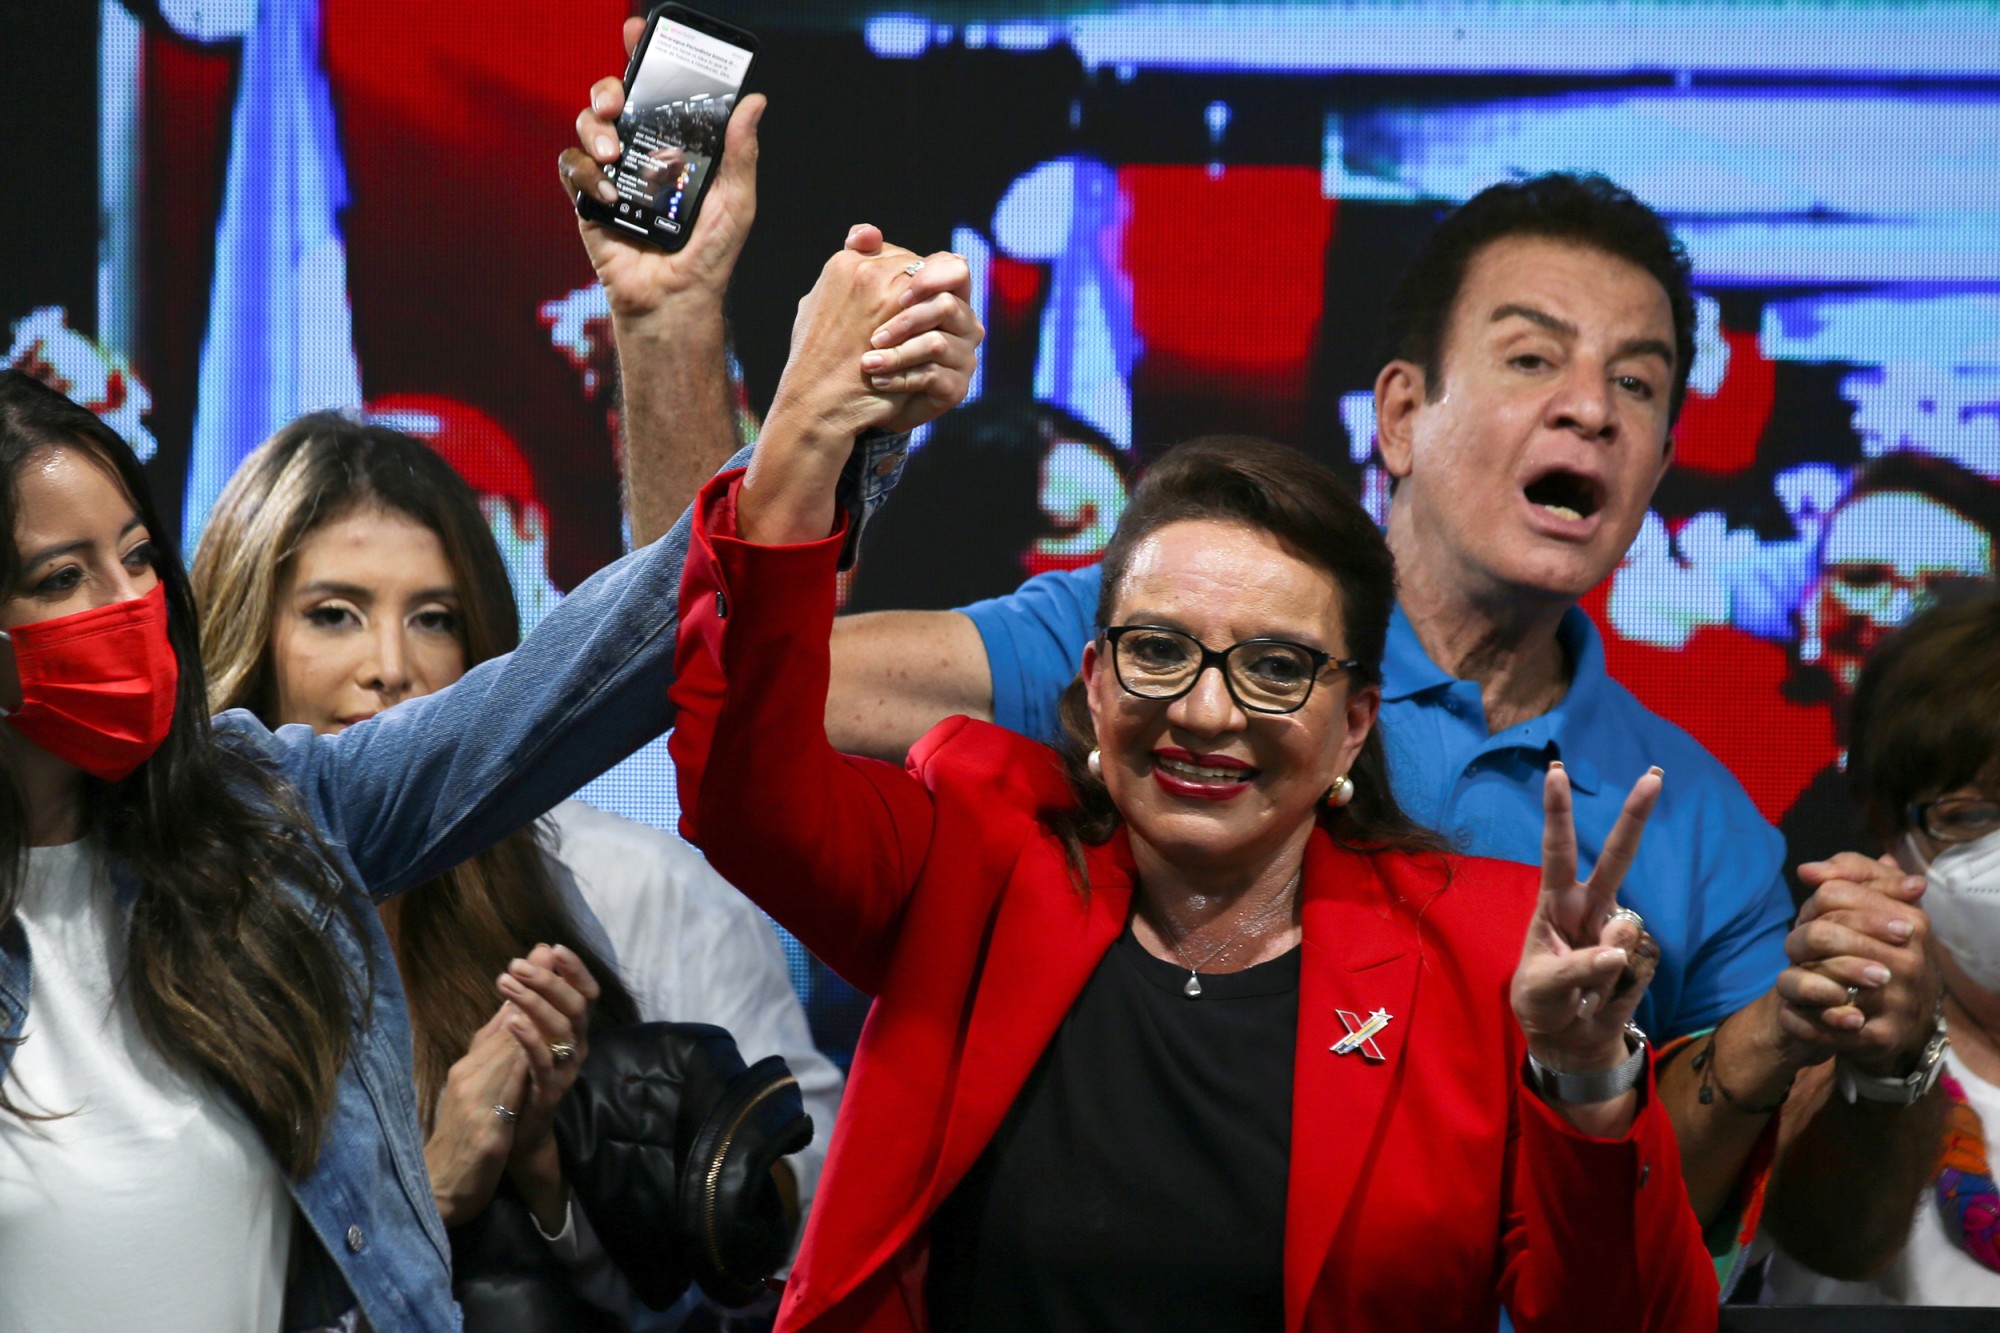 Xiomara Castro, presidential candidate of the Liberty and Refoundation Party , gives a statement after the closing of the general election in Tegucigalpa, Honduras on Nov. 28, 2021. Jose Cabezas / Reuters